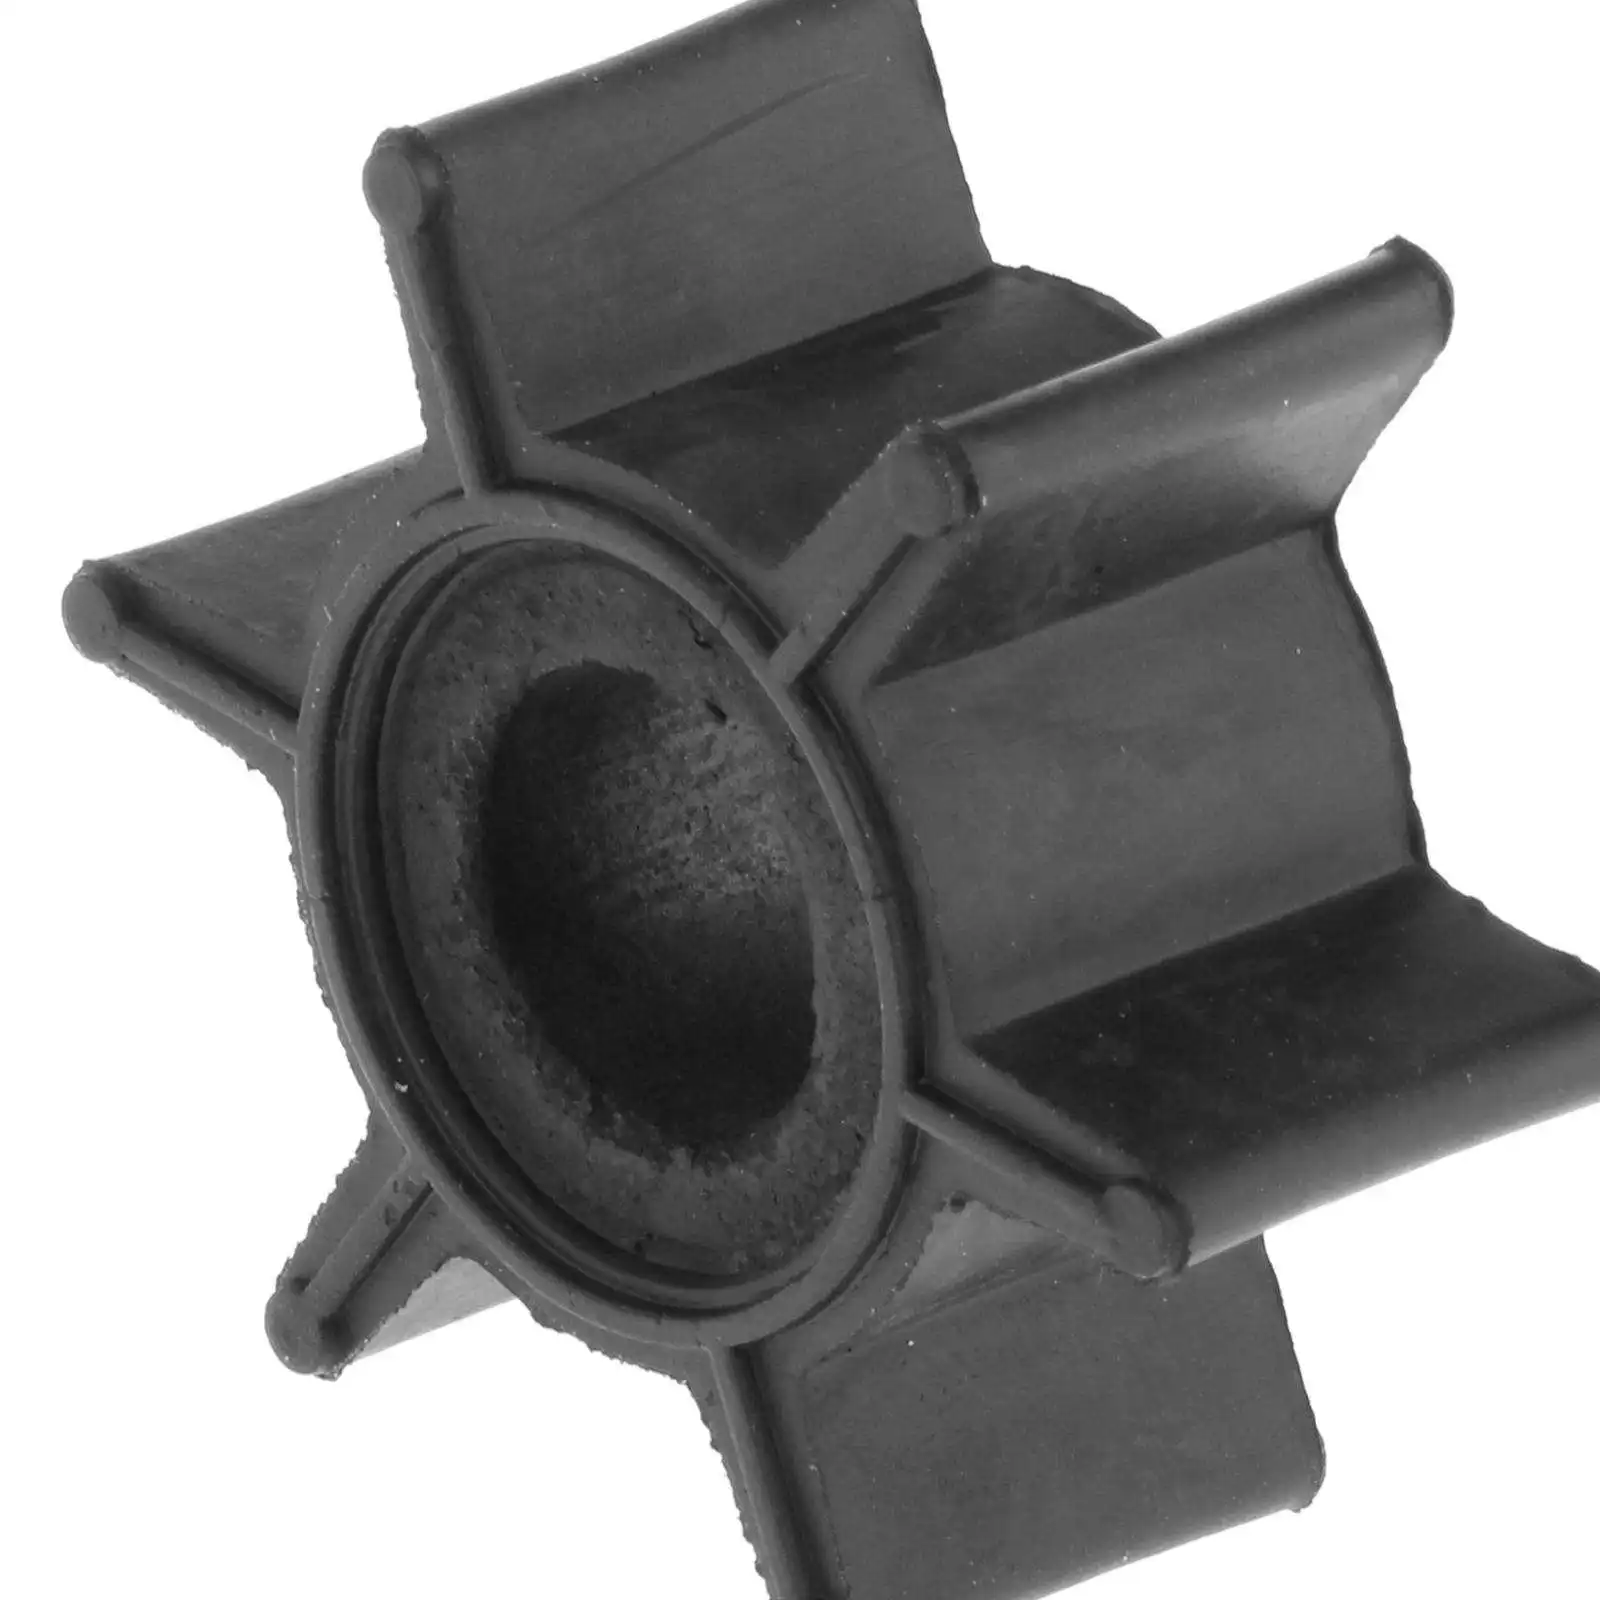 Water Pump Impeller 369-65021-1 47-16154-3 for Mercury   Tohatsu 2HP 2.5HP 3.5HP 4HP 5HP 6HP 2 /  Outboard Engine